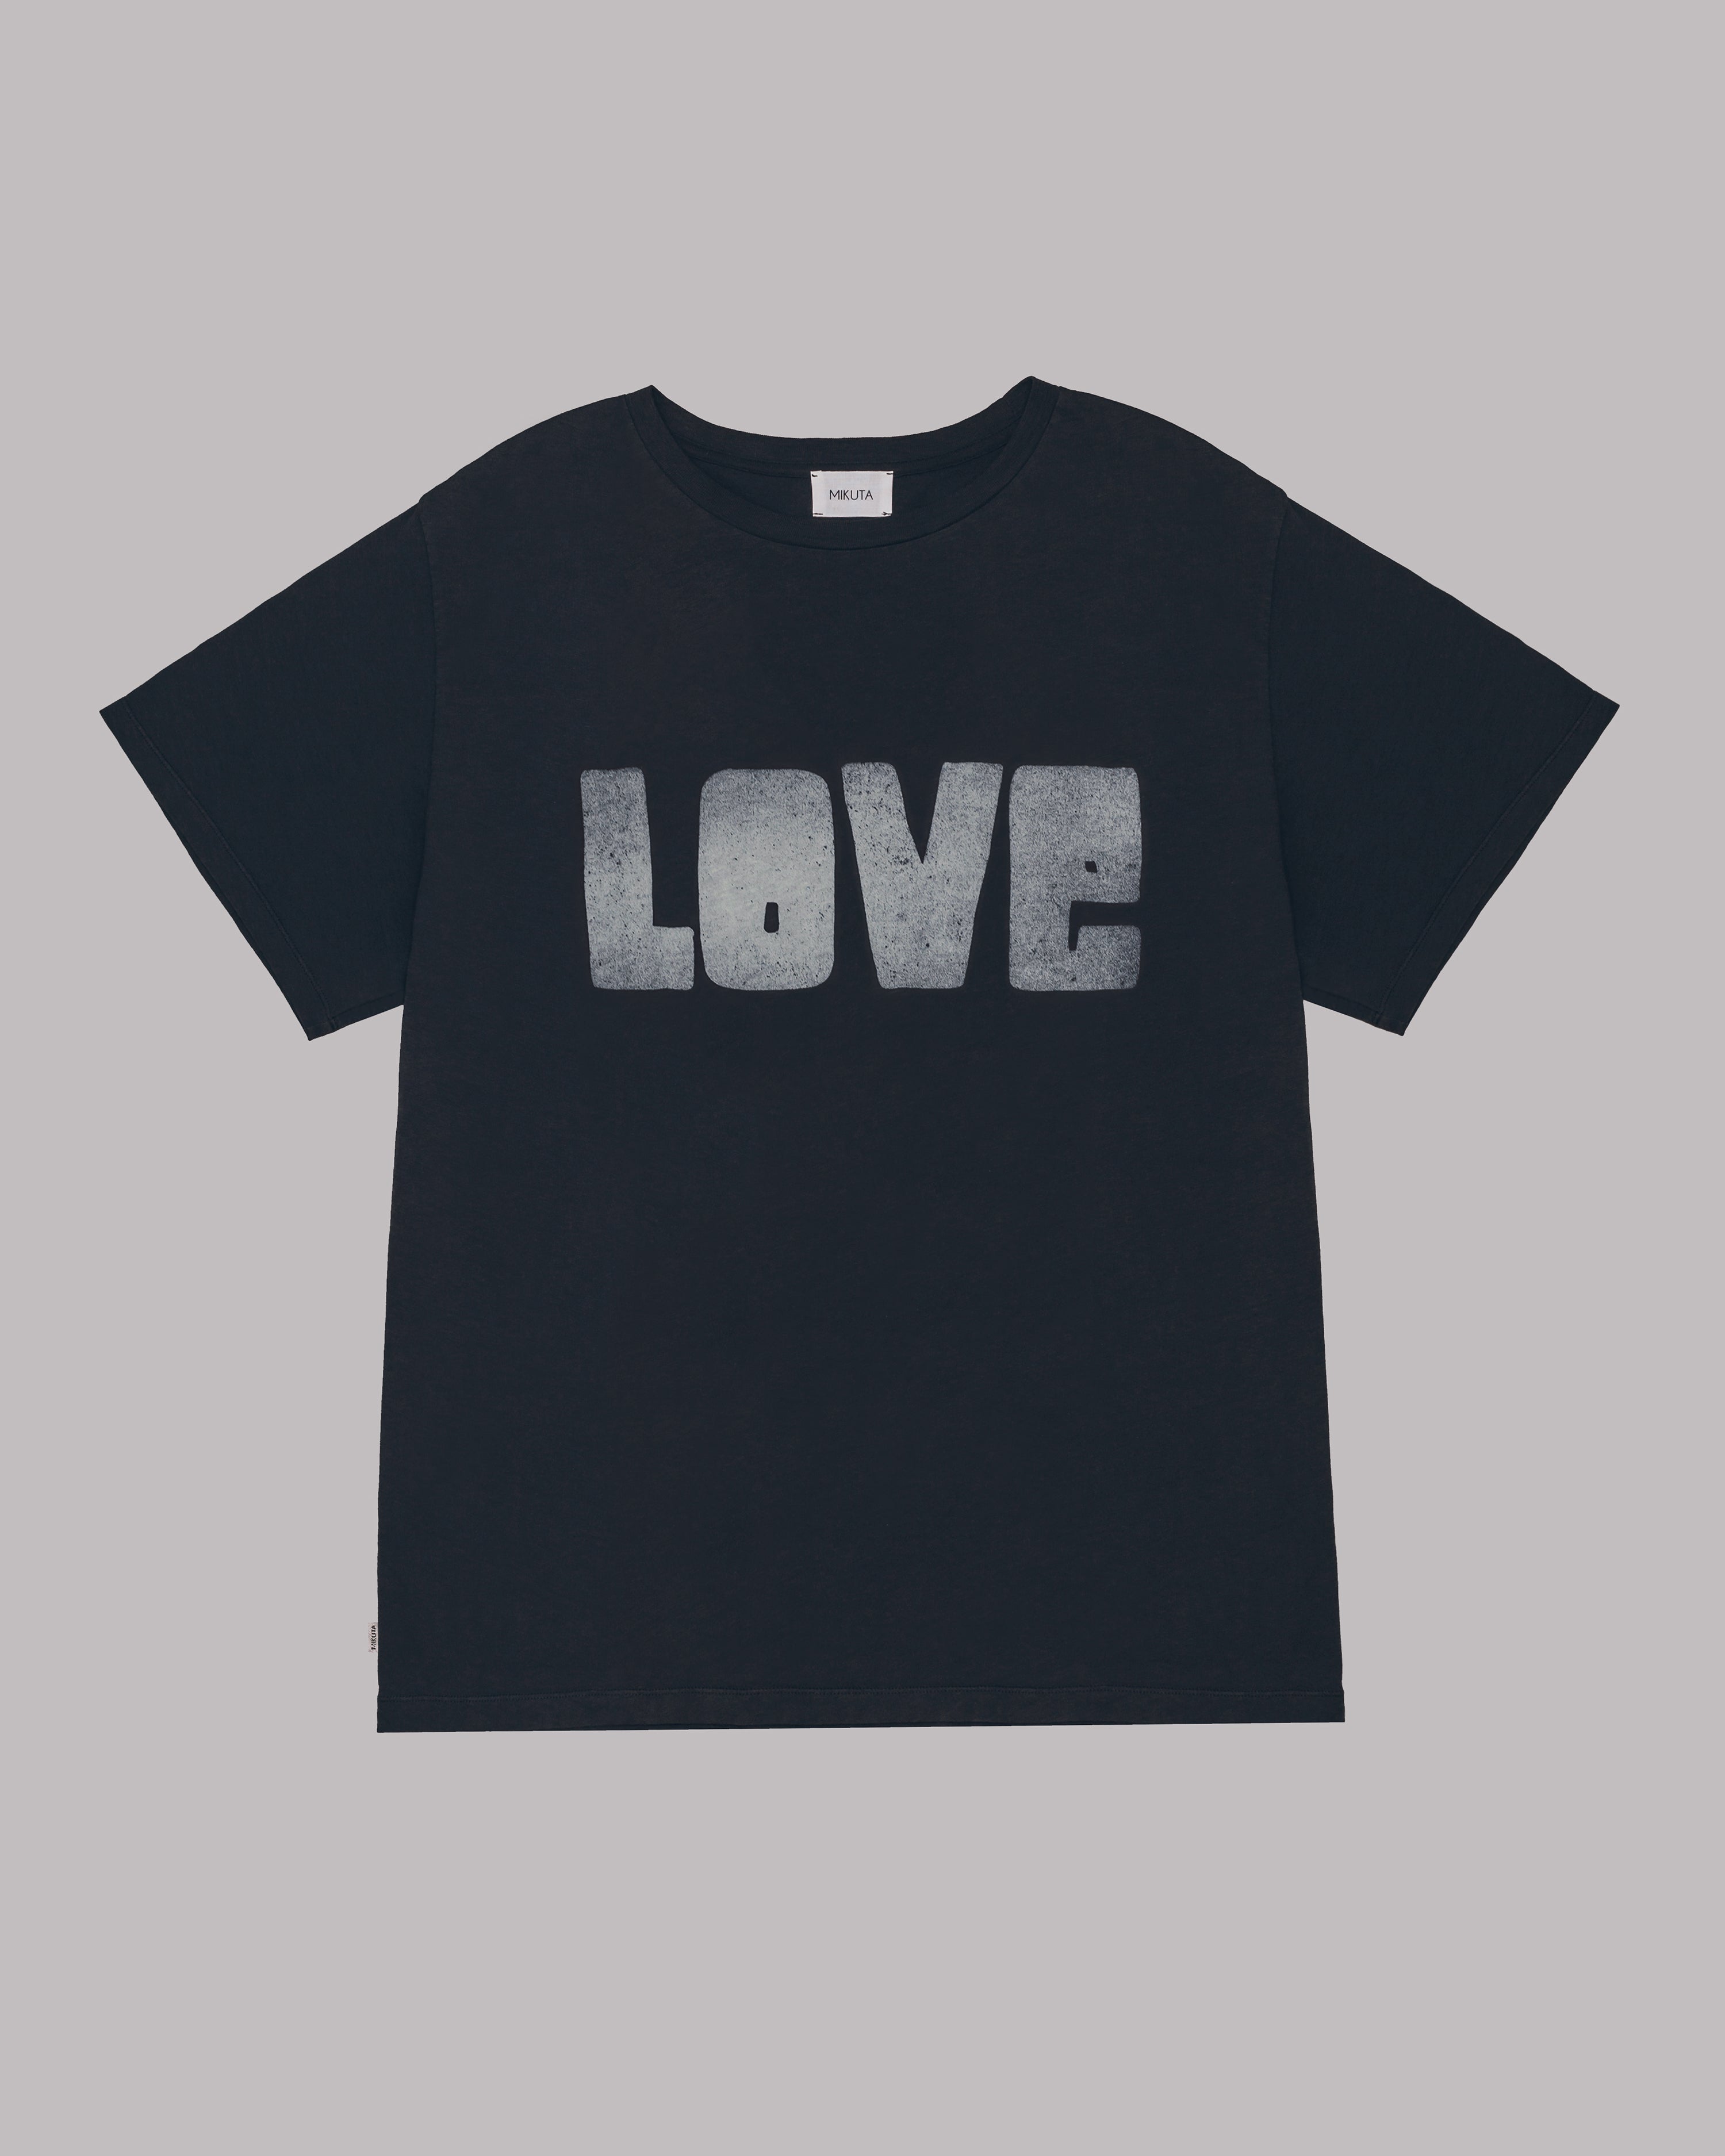 The Dark Love Relaxed T-Shirt